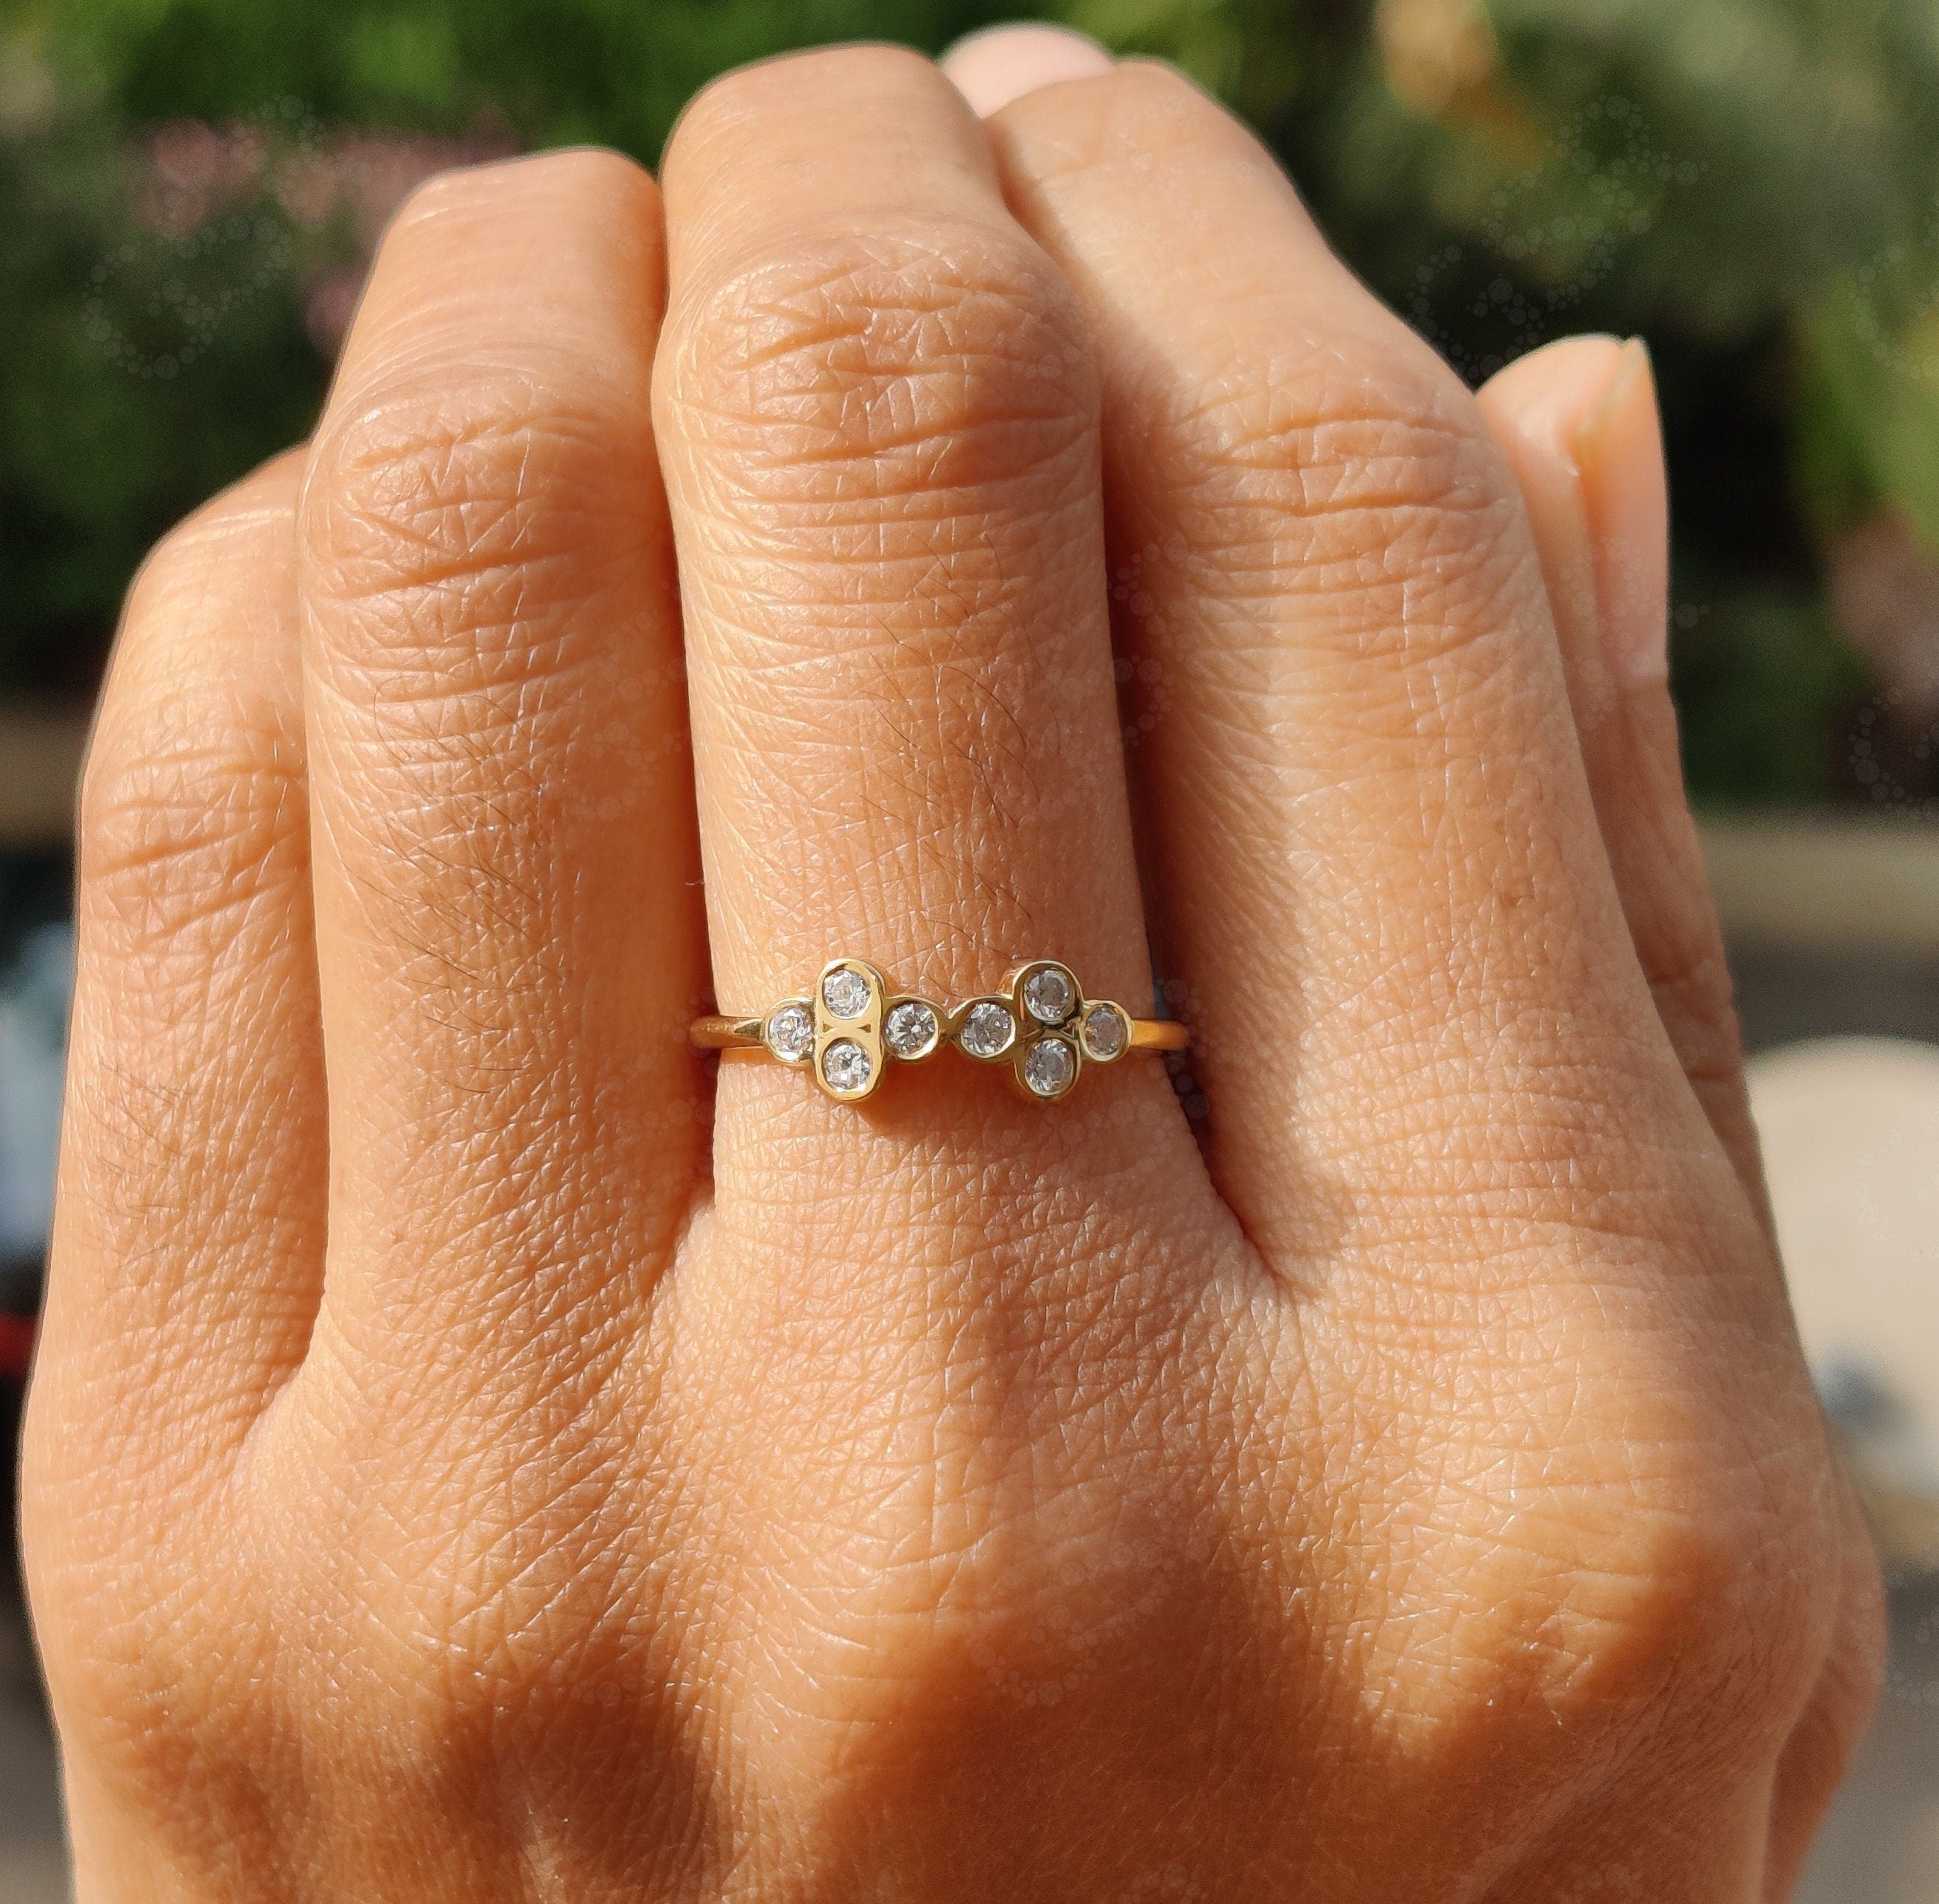 Cluster Stacking Ring in Silver and Gold: Dainty Moissanite Anniversary Ring with a Multi-Stone Design, Perfect for Weddings and Special Occasions